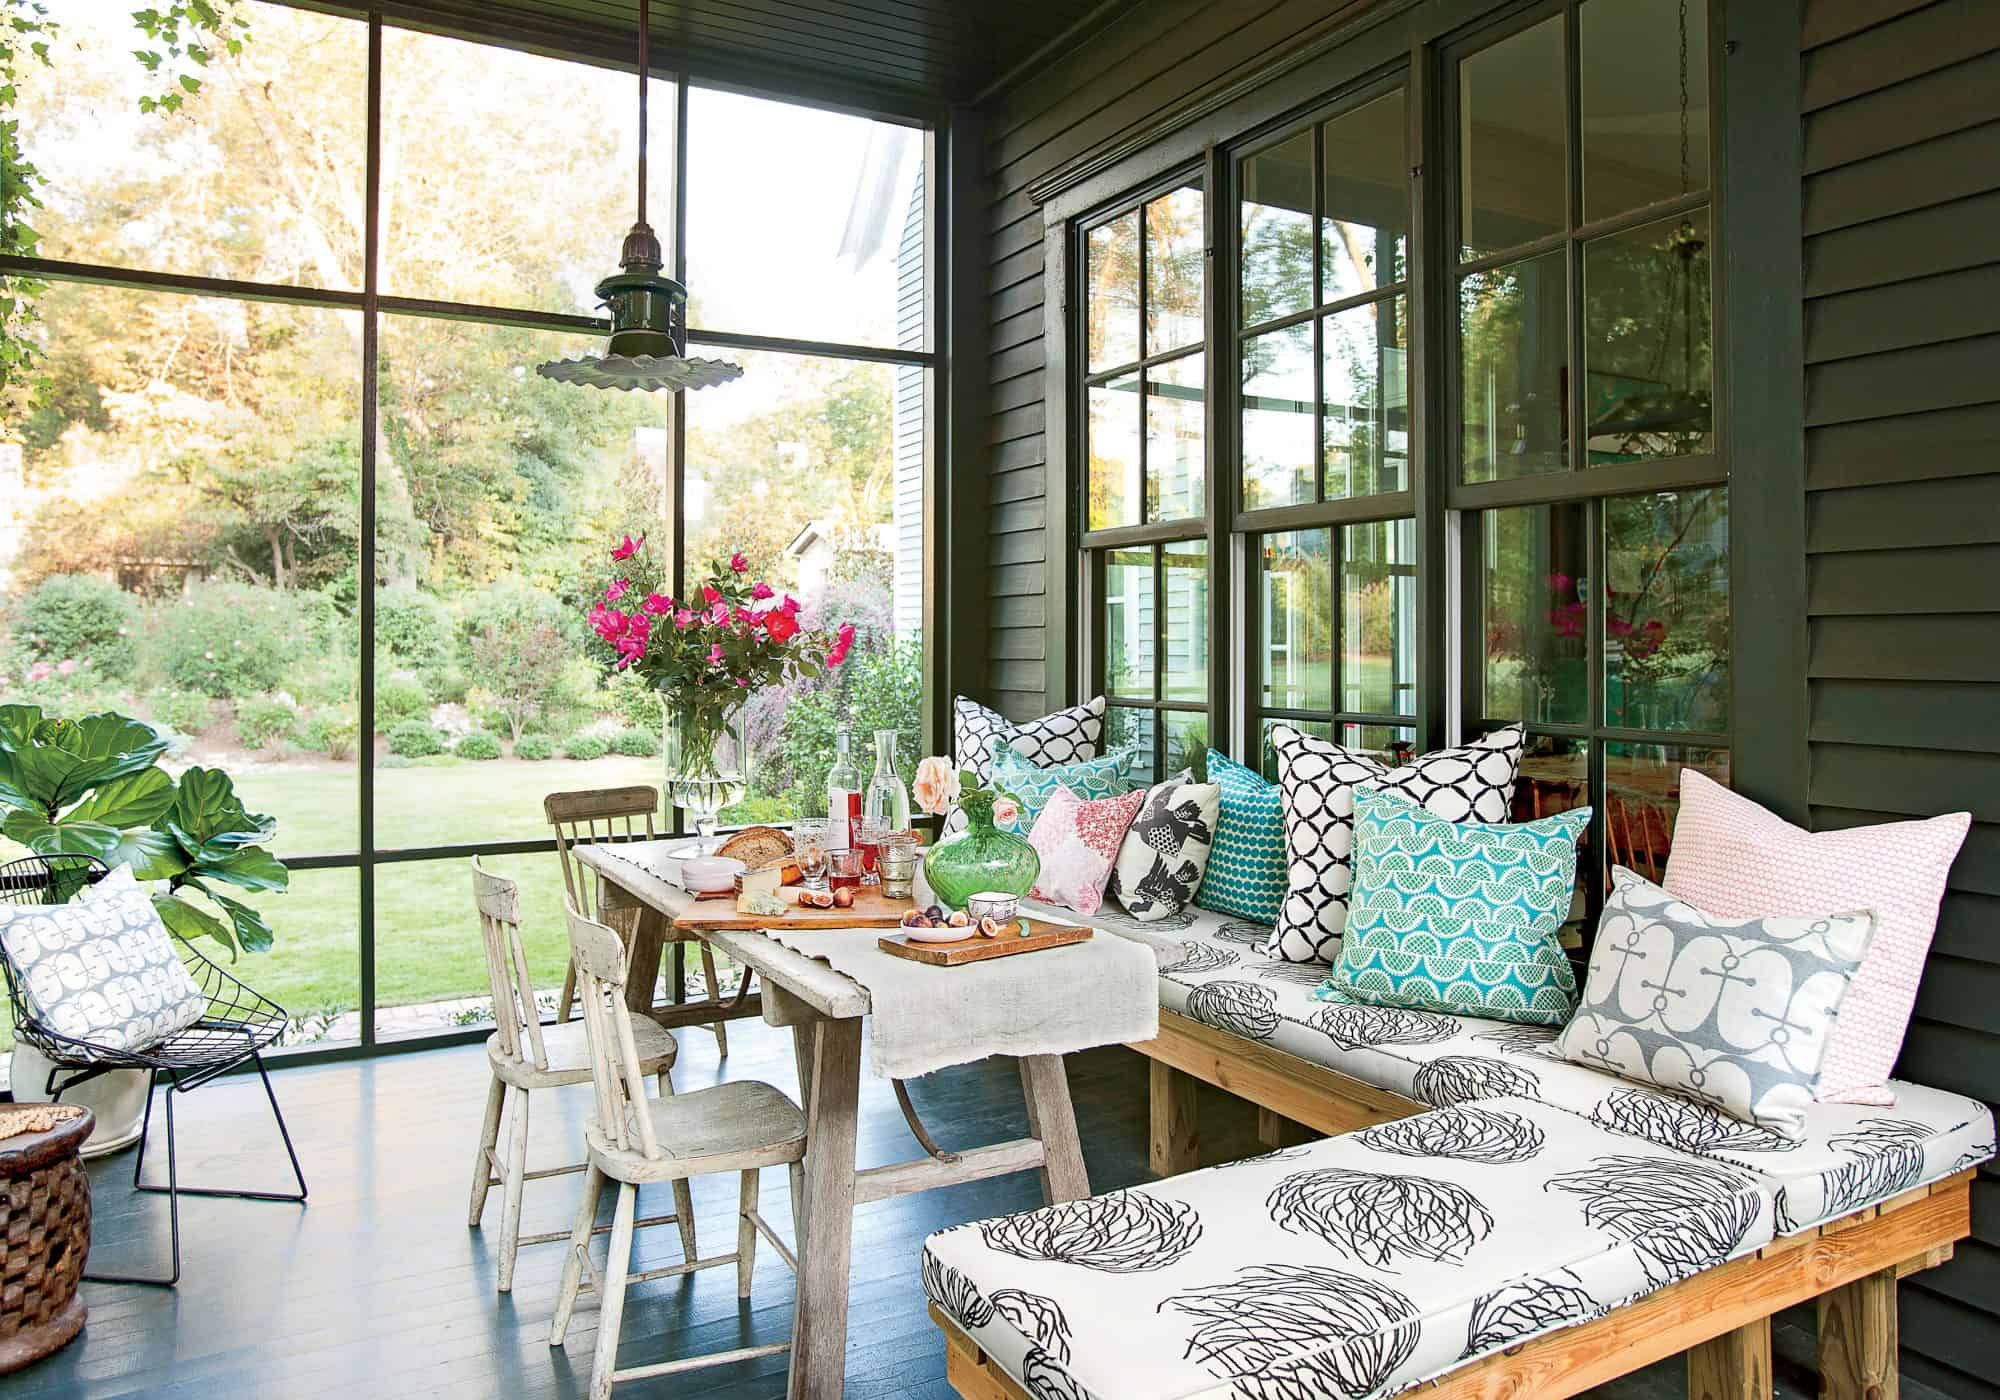 Porch decorating ideas that will create a magical oasis